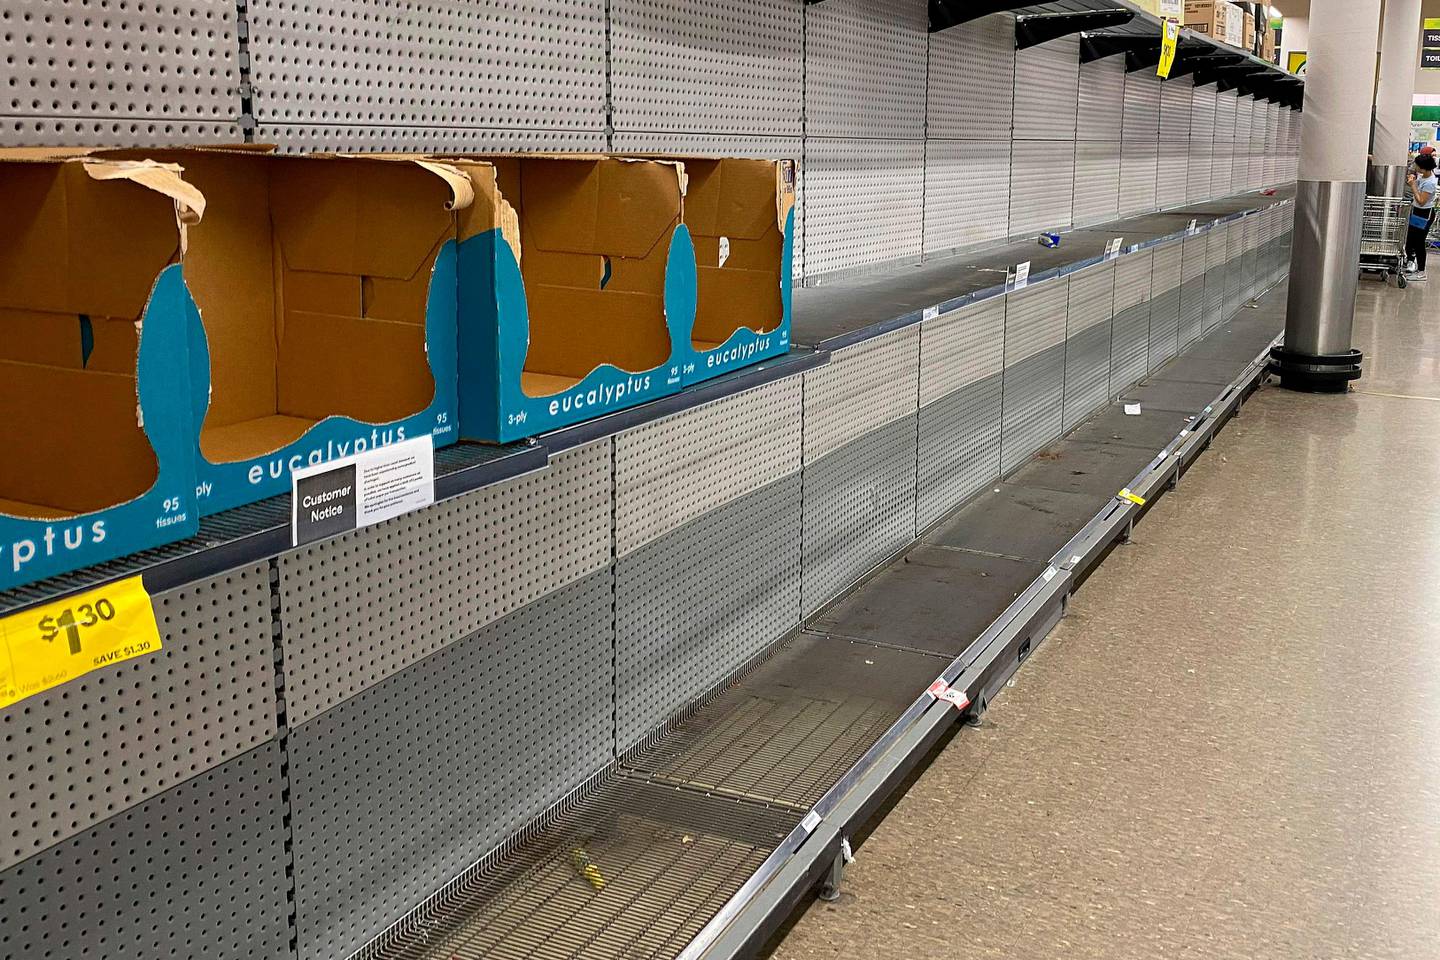 Shelves usually stocked with toilet rolls are seen empty in a supermarket following panic buying in Sydney on March 8, 2020. - A fight over toilet paper in an Australian supermarket on March 7 prompted police to call for calm after the latest violence sparked by coronavirus-induced panic buying in the country. (Photo by Saeed KHAN / AFP)